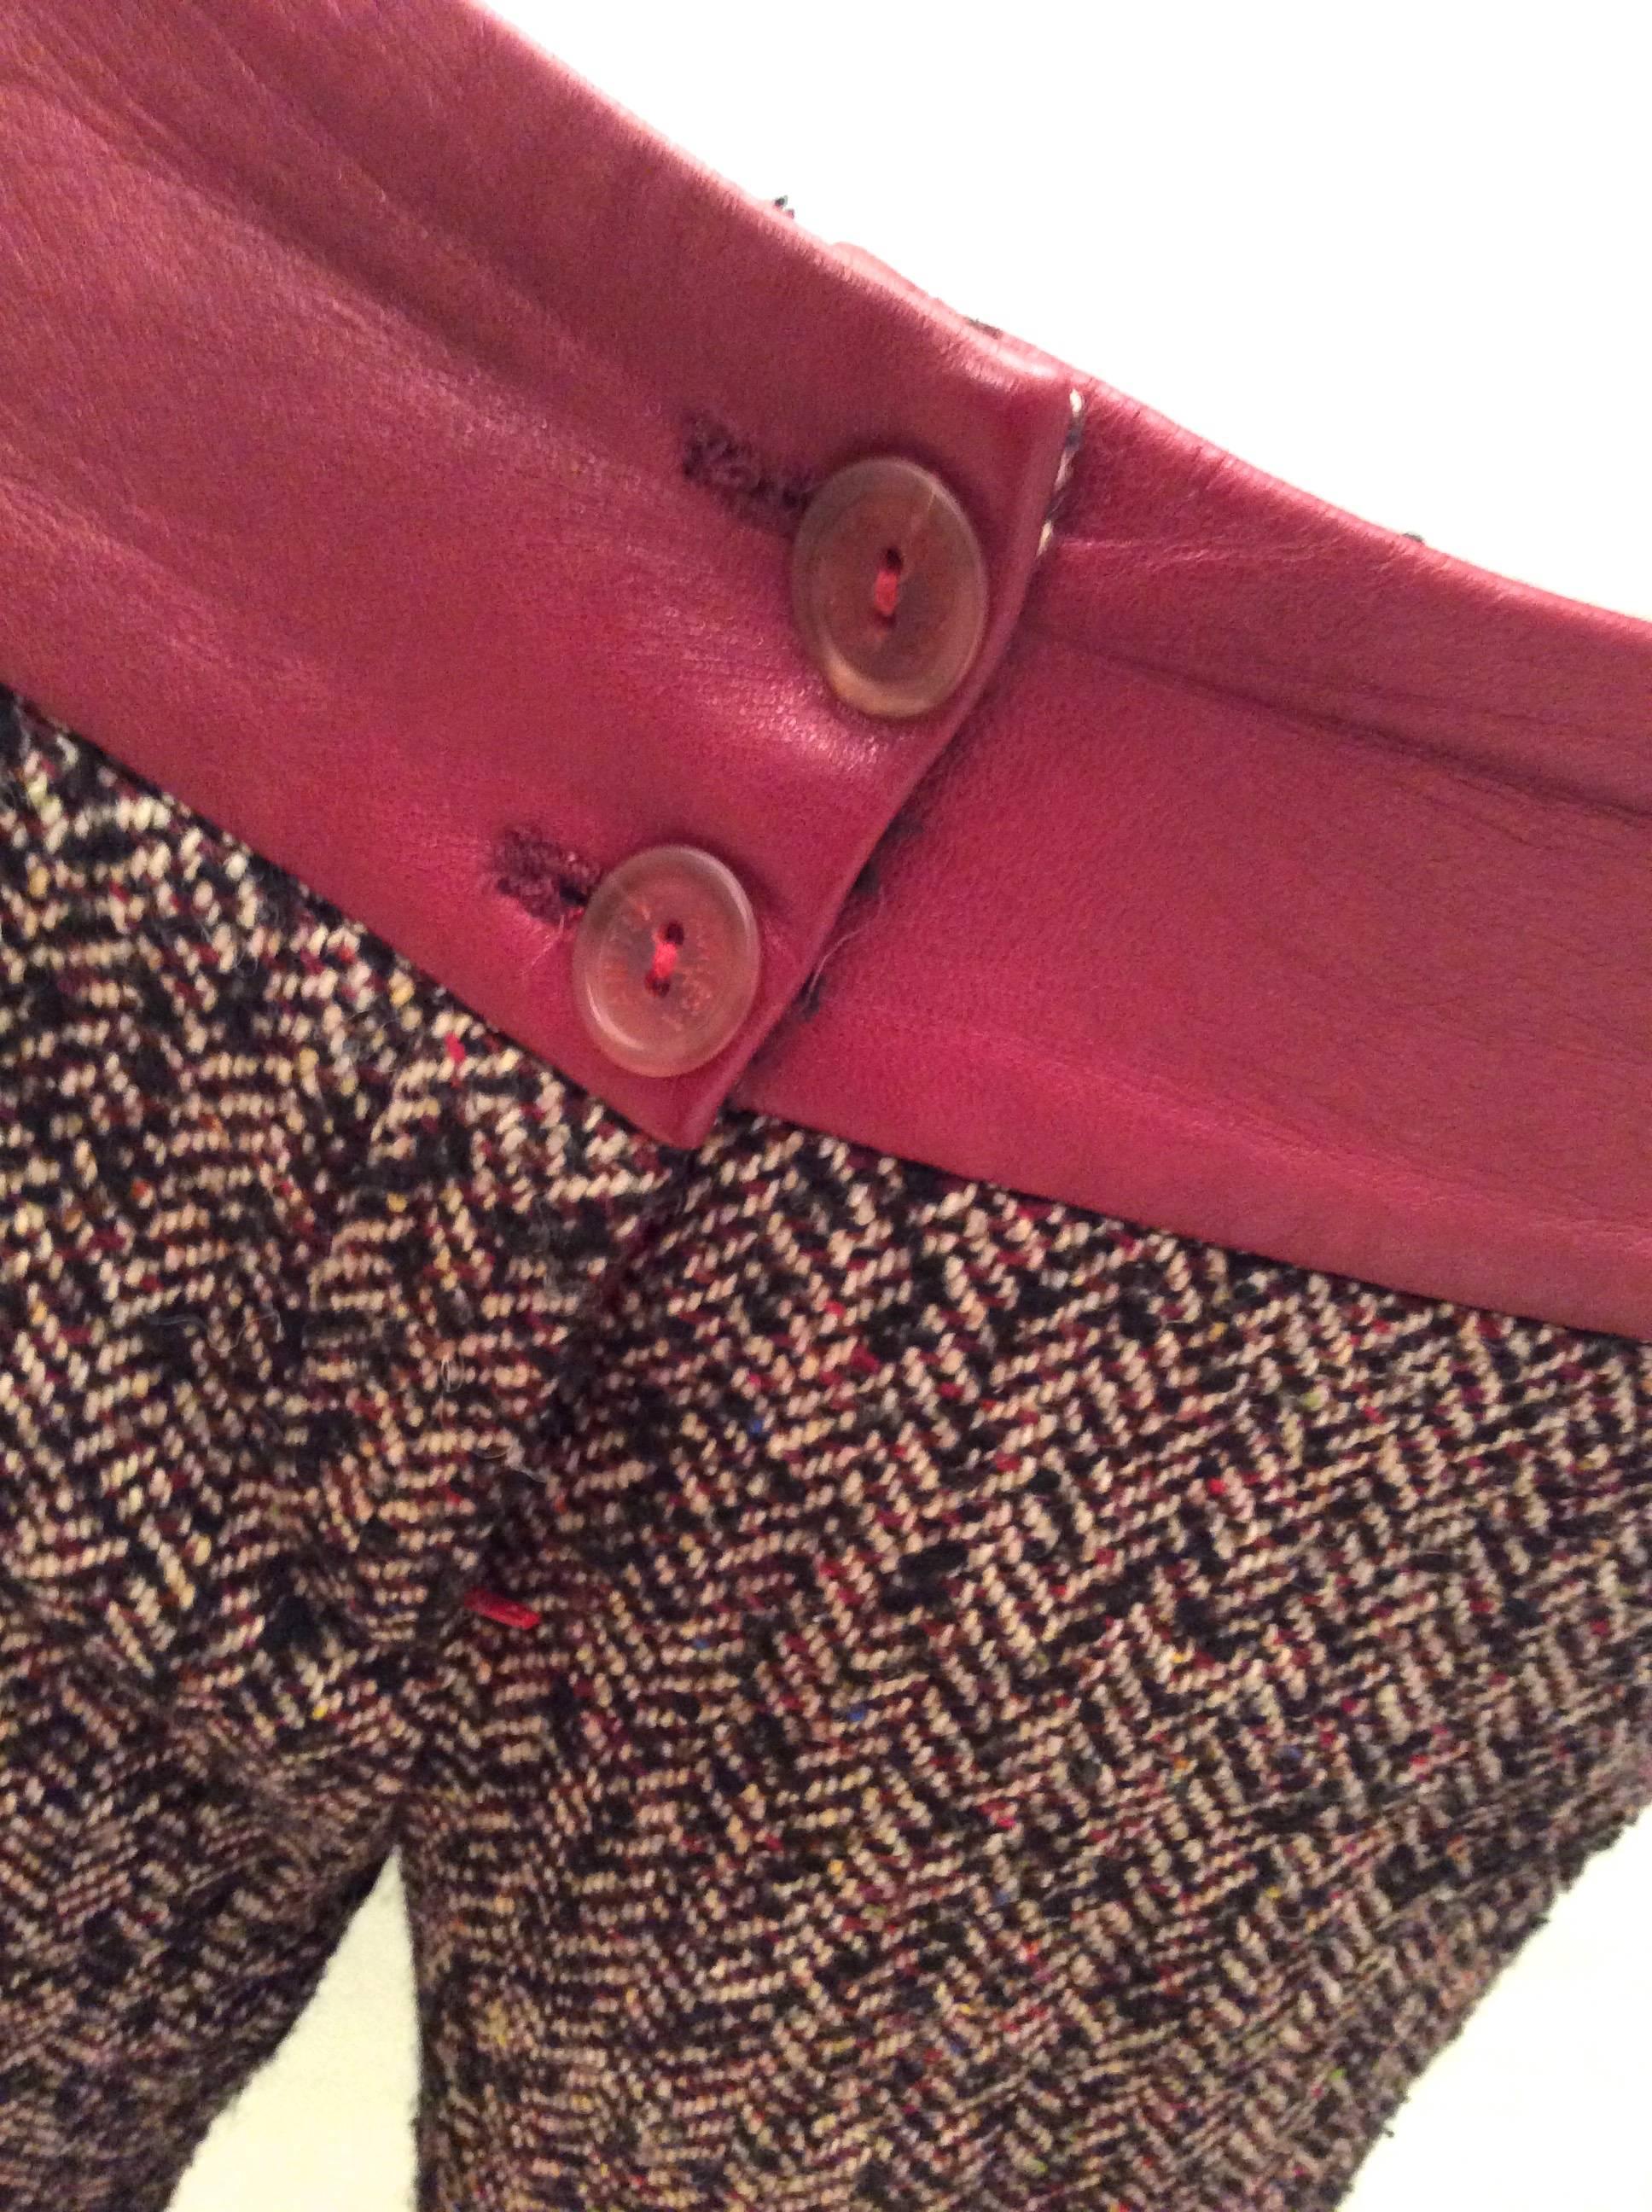 This pair of gaucho pants from the 1970's is a beautiful combination of an acrylic wood blend with red leather trim at the waist of the jacket. The wool acrylic blend is a threaded pattern of red, black, and white woven into a diagonal pattern. The